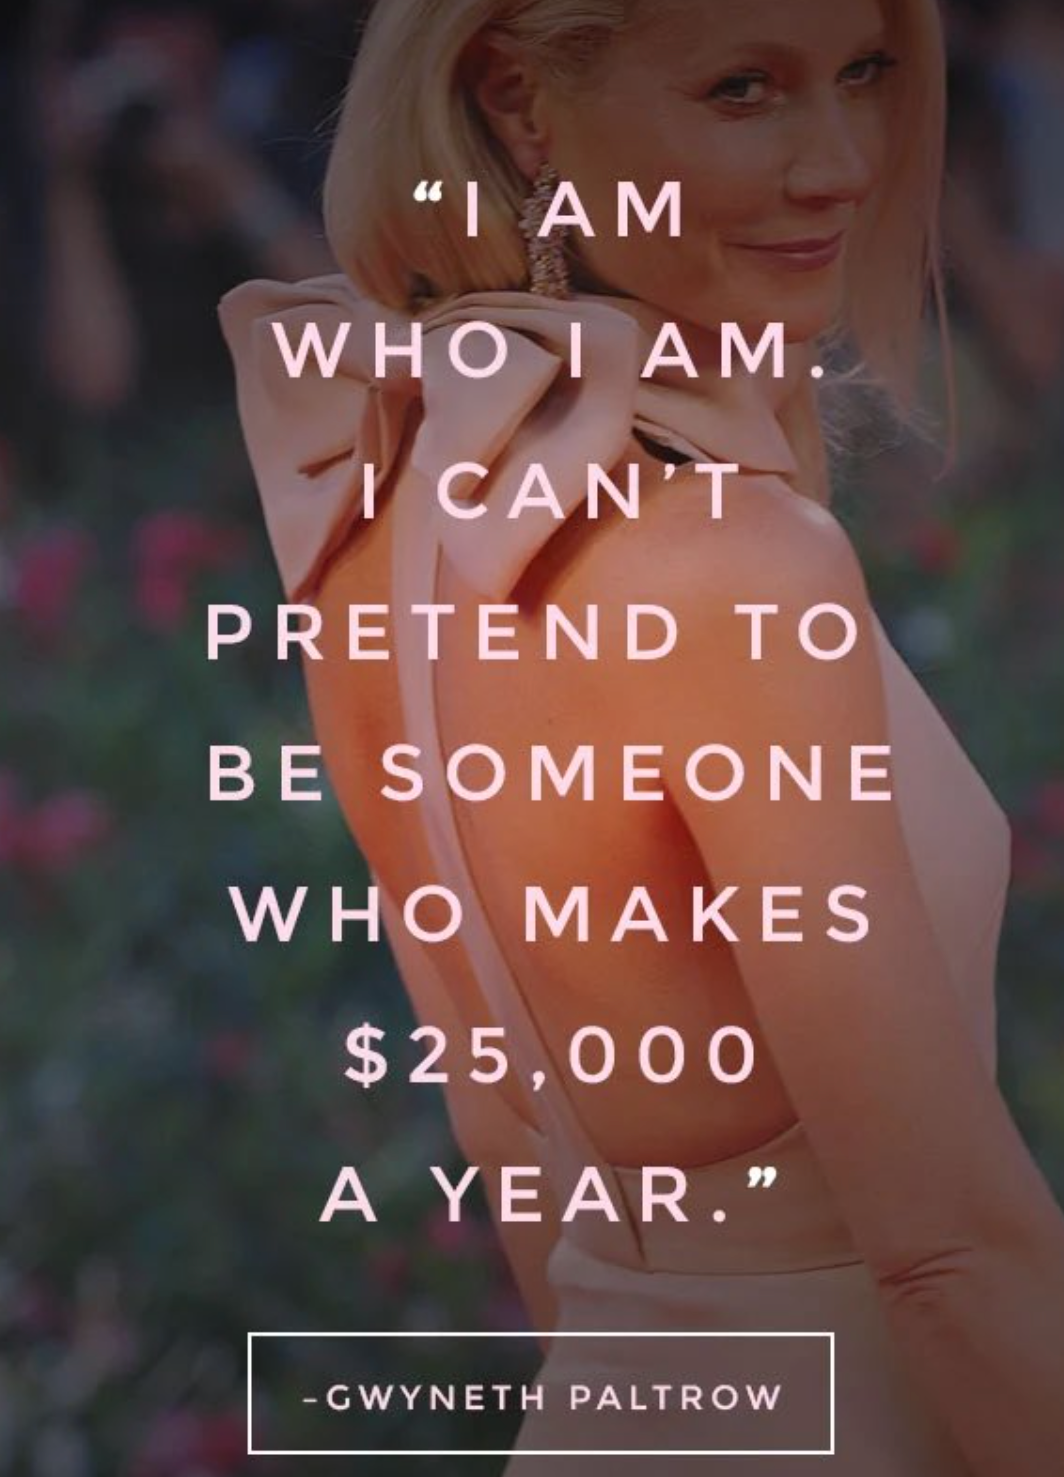 Insane Gwyneth Paltrow Quotes - toyota - "I Am Who I Am. I Can'T Pretend To Be Someone Who Makes $25,000 A Year." Gwyneth Paltrow